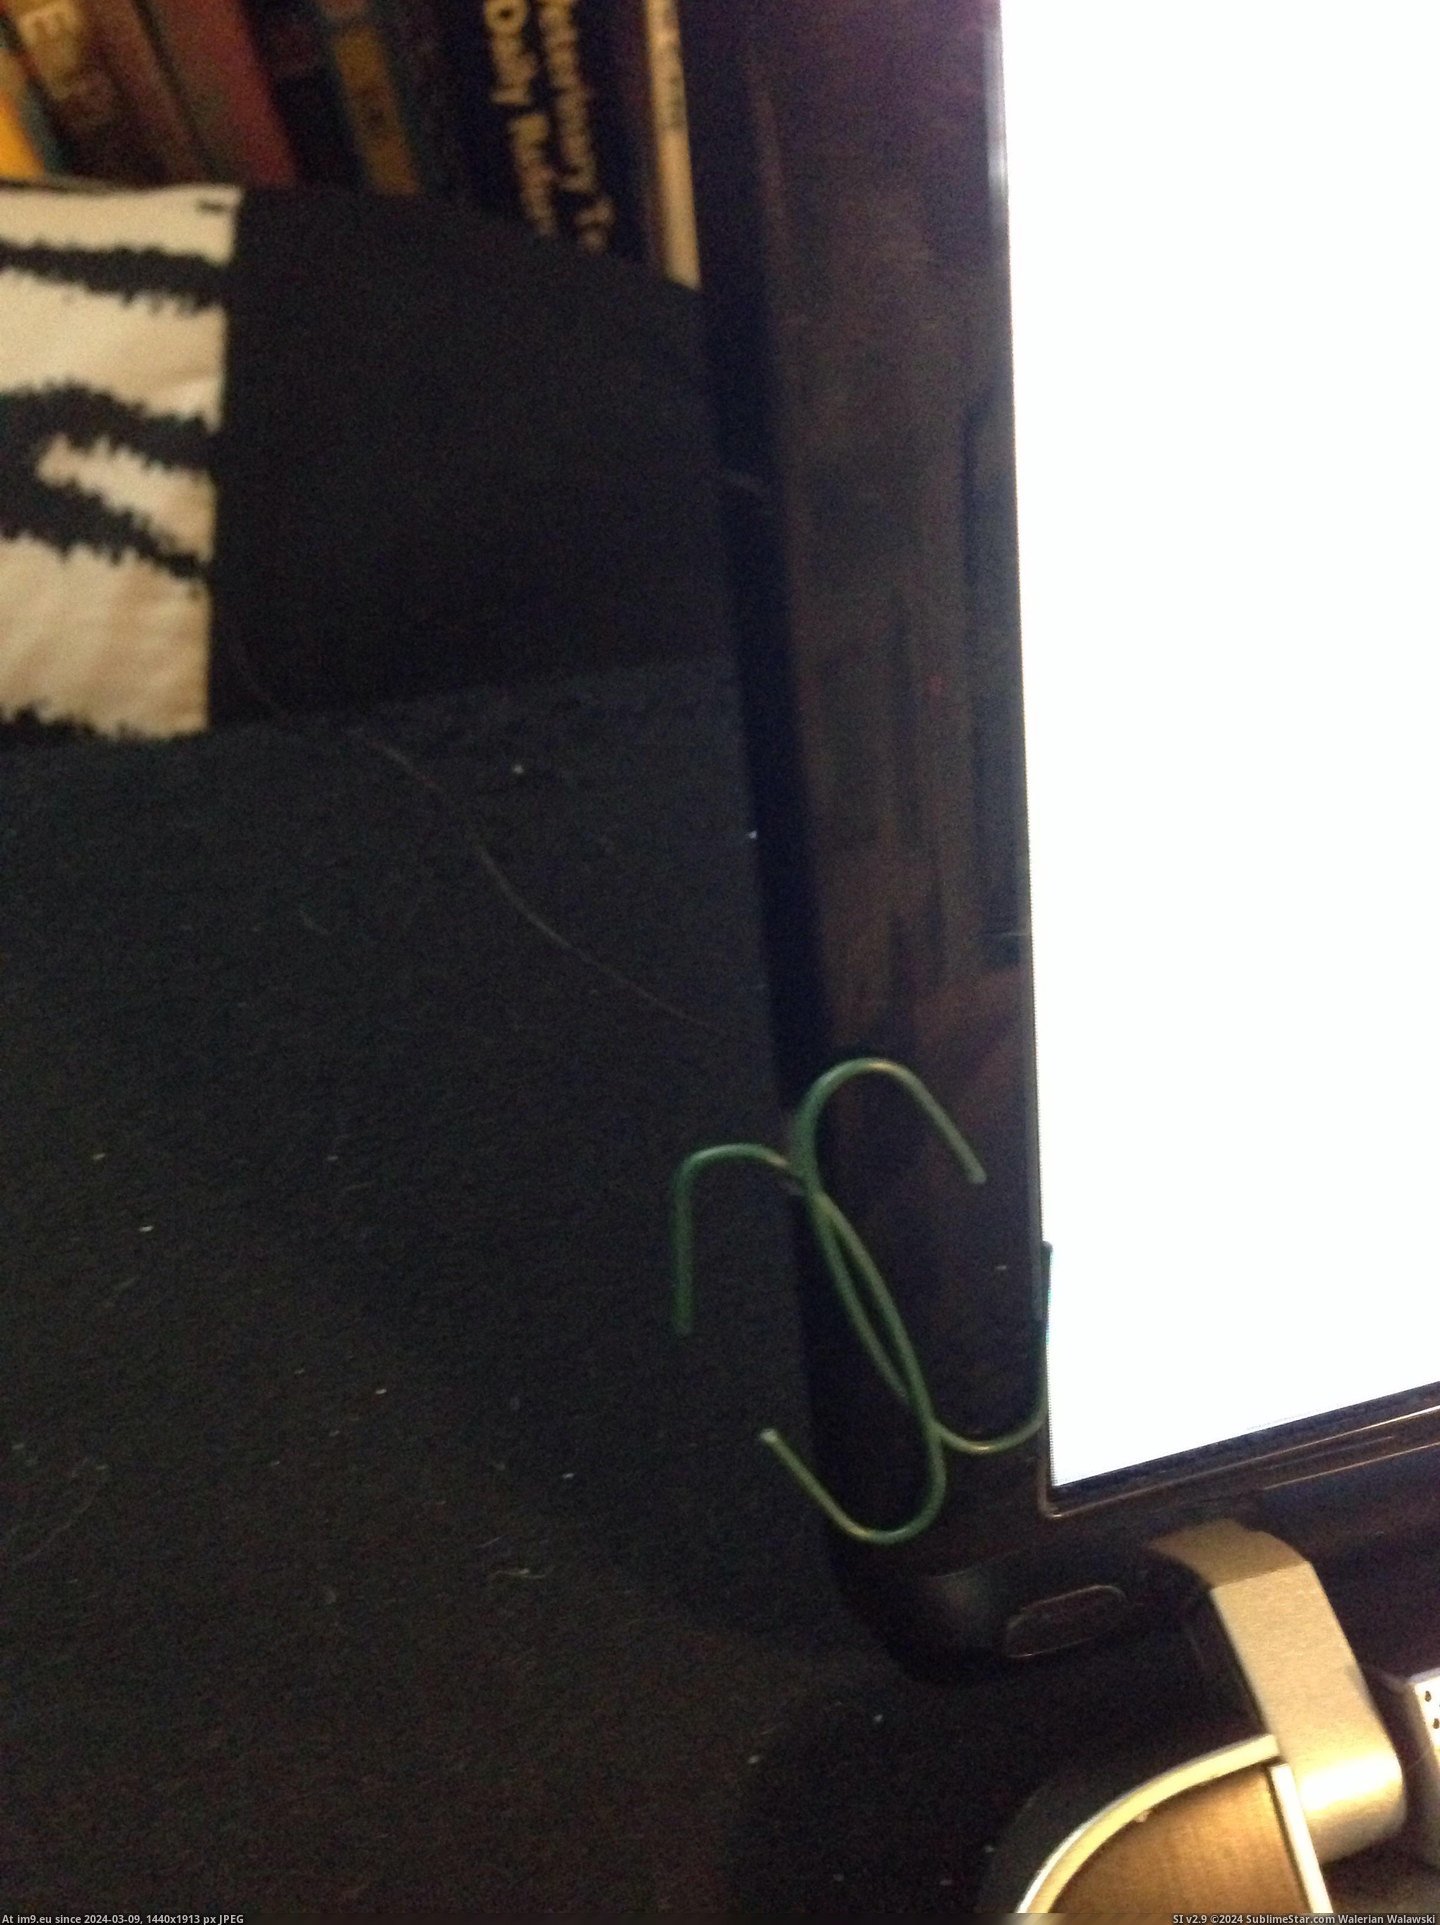 #Small #Screen #Magnetic #Portion #Laptop [Mildlyinteresting] A very small portion of my laptop's screen is magnetic Pic. (Изображение из альбом My r/MILDLYINTERESTING favs))